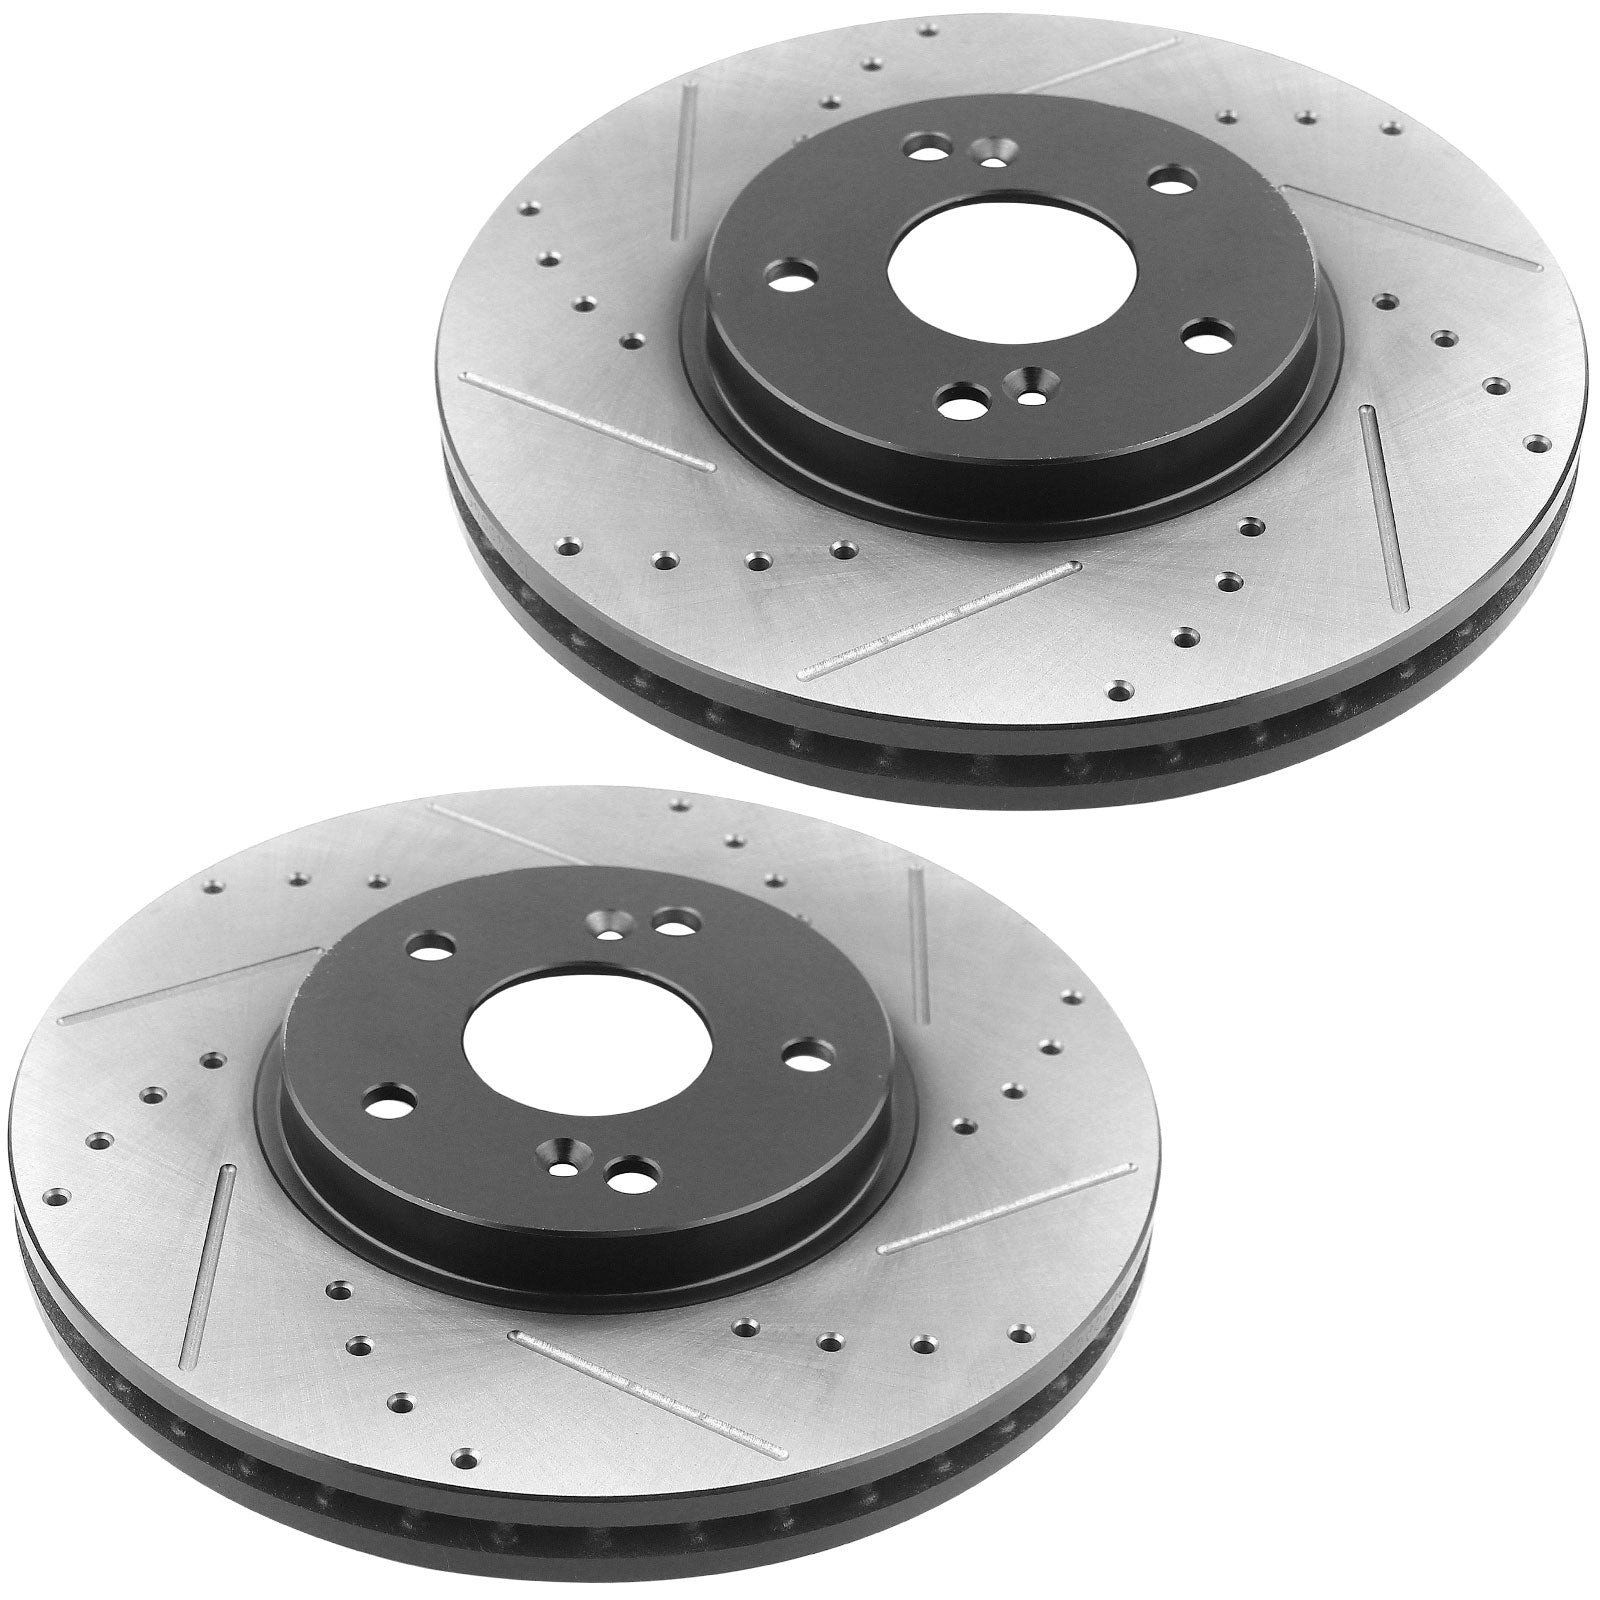 MotorbyMotor Front Brake Rotors & Brake Pad Kit 300mm Drilled & Slotted Design Including CLEANER DOT4 FLUID Fits for Acura TSX, Acura TL, Honda Accord MotorbyMotor